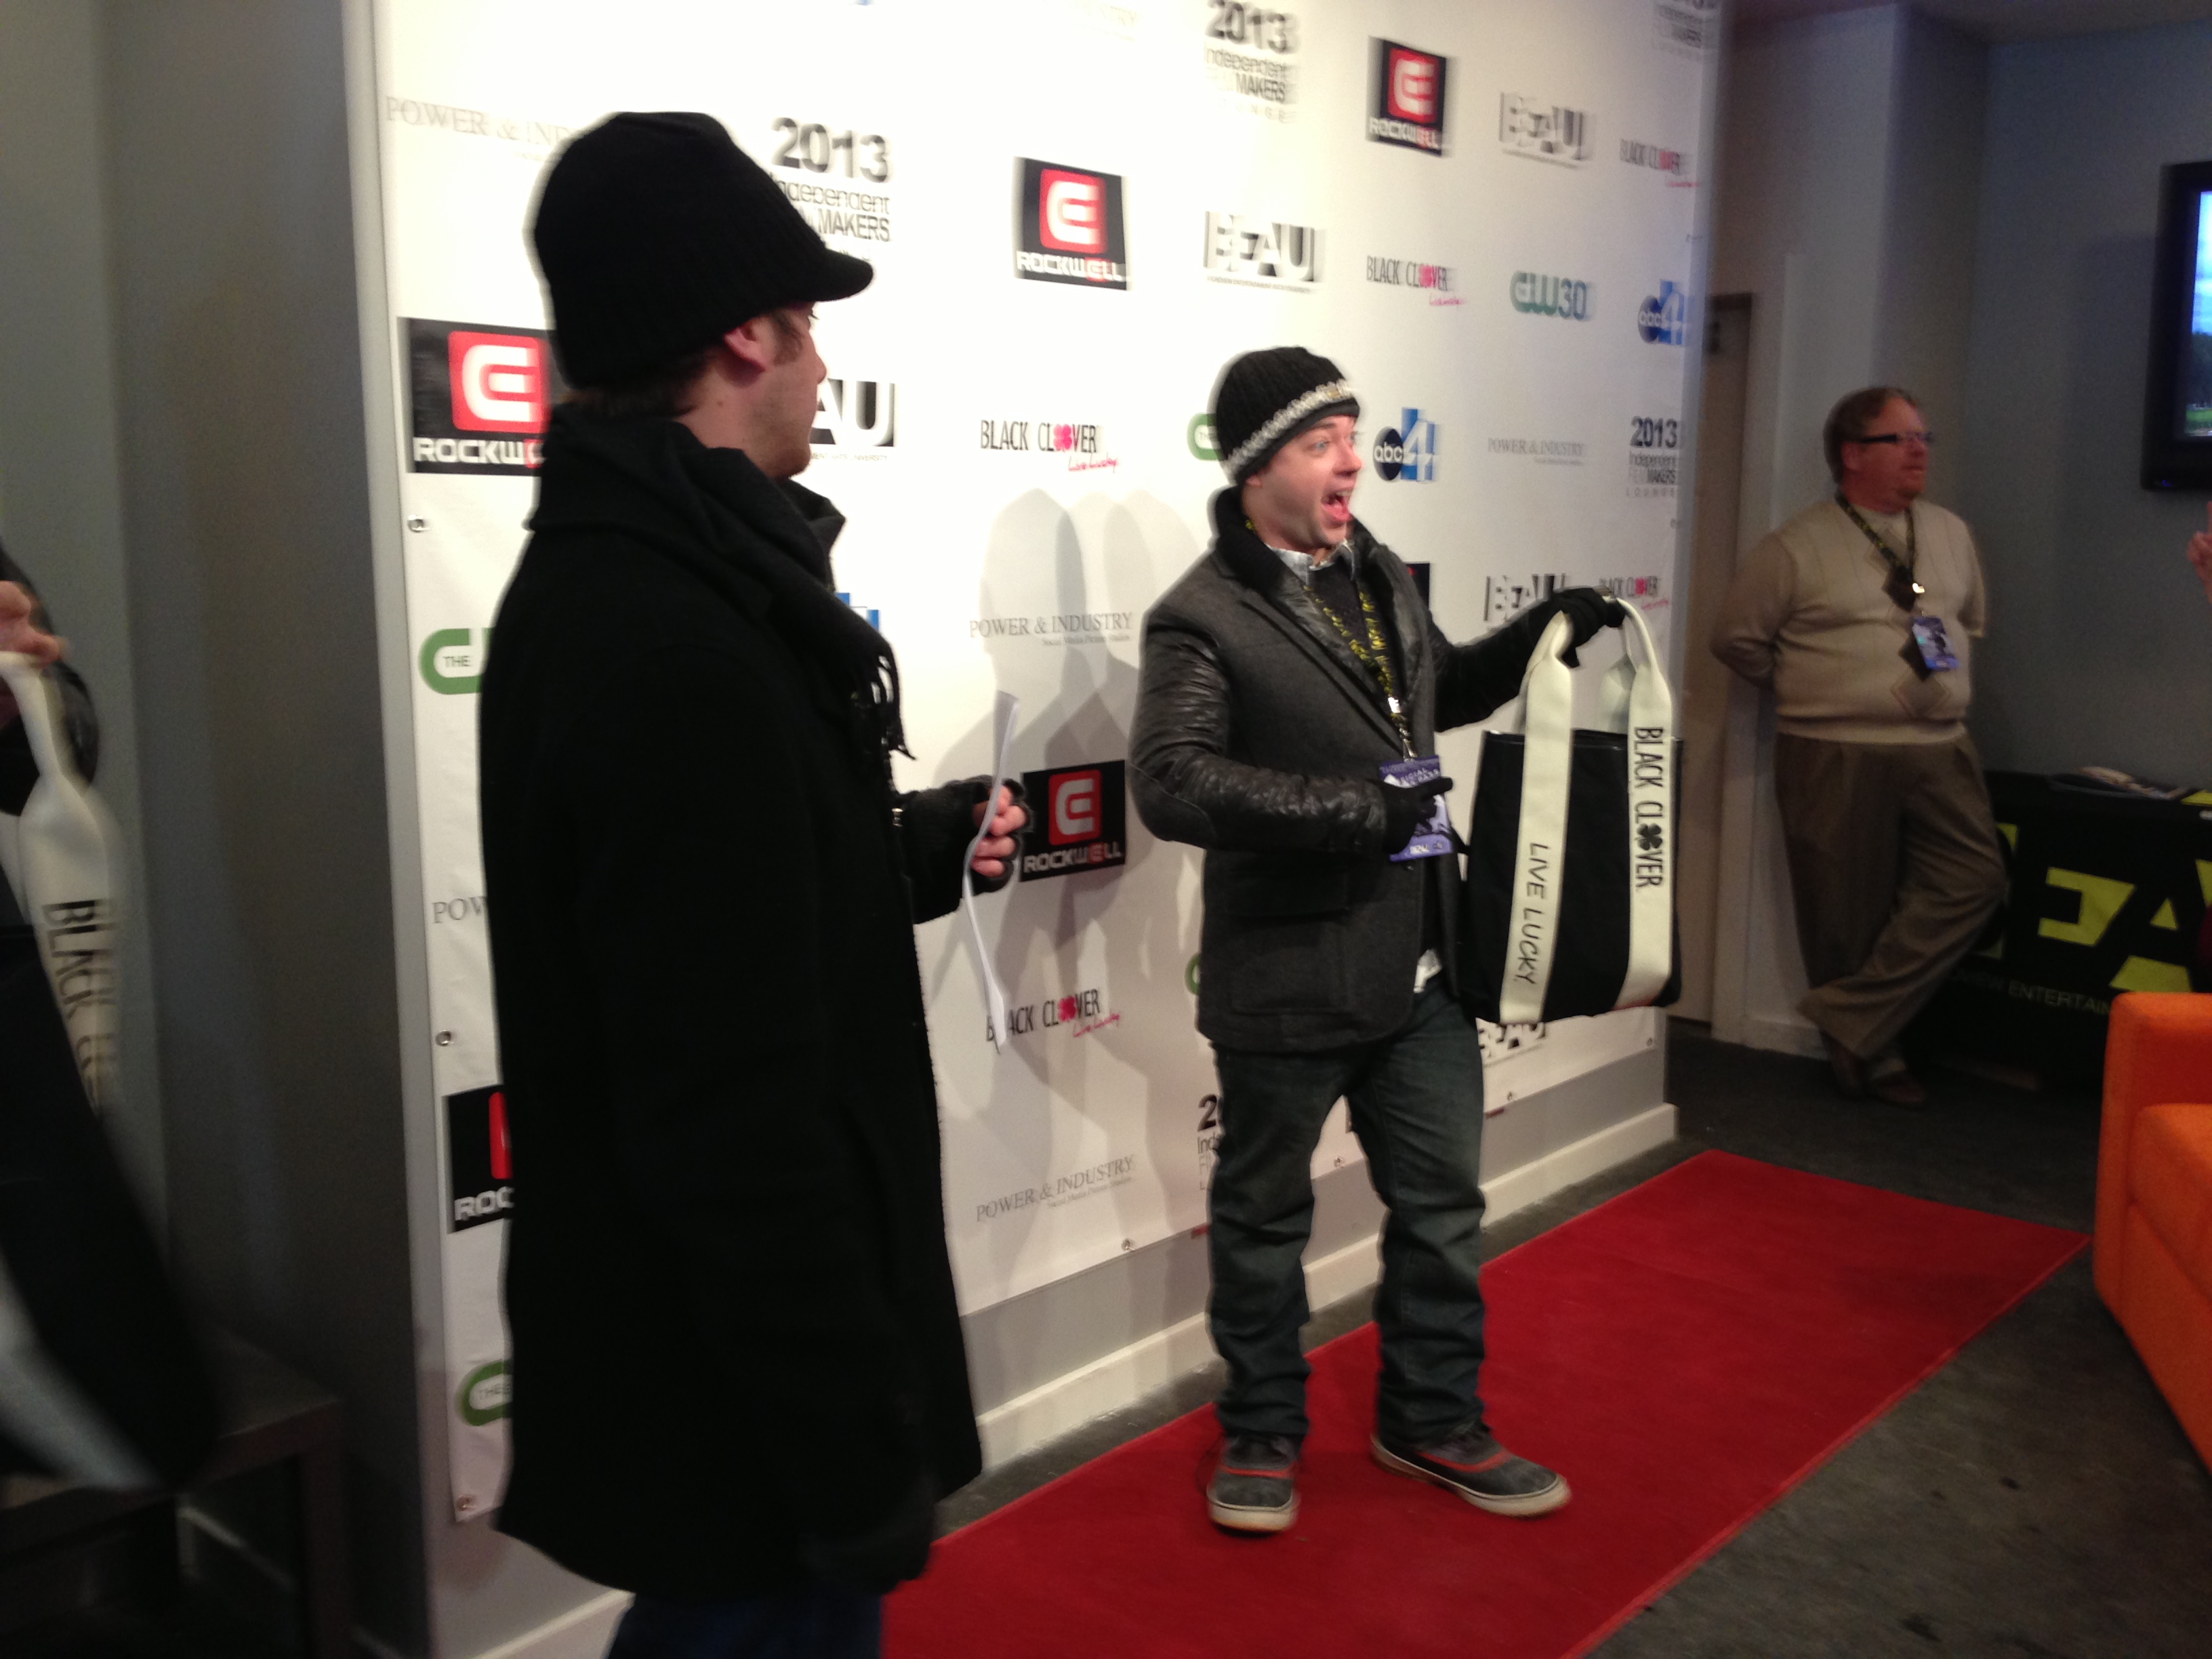 Matthew Smith at The Sundance Film Festival 2013 Independent Film Maker's Lounge